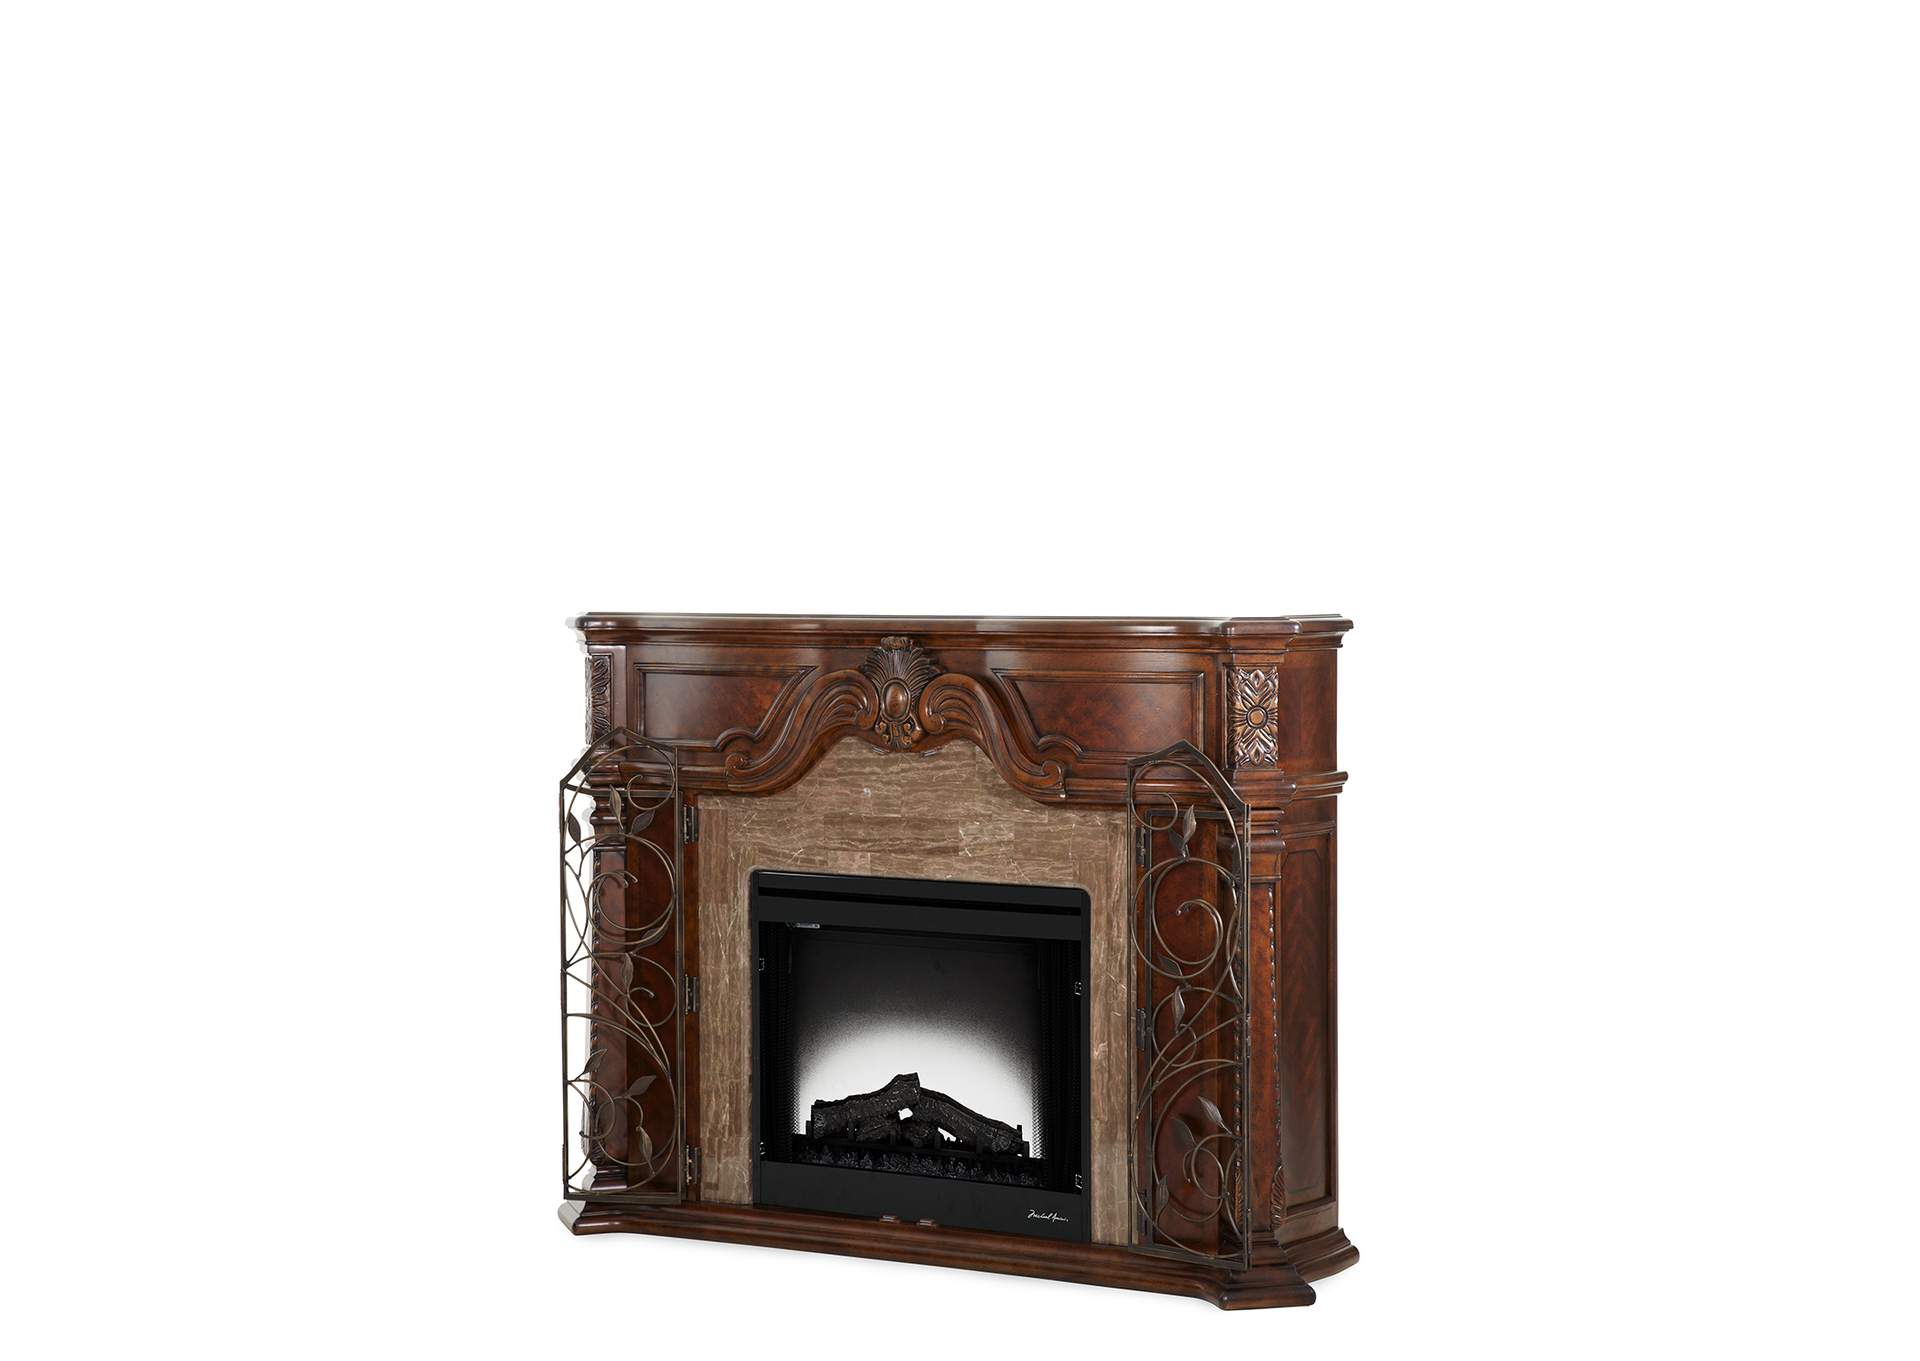 Windsor Court Fireplace Vintage Fruitwood,AICO